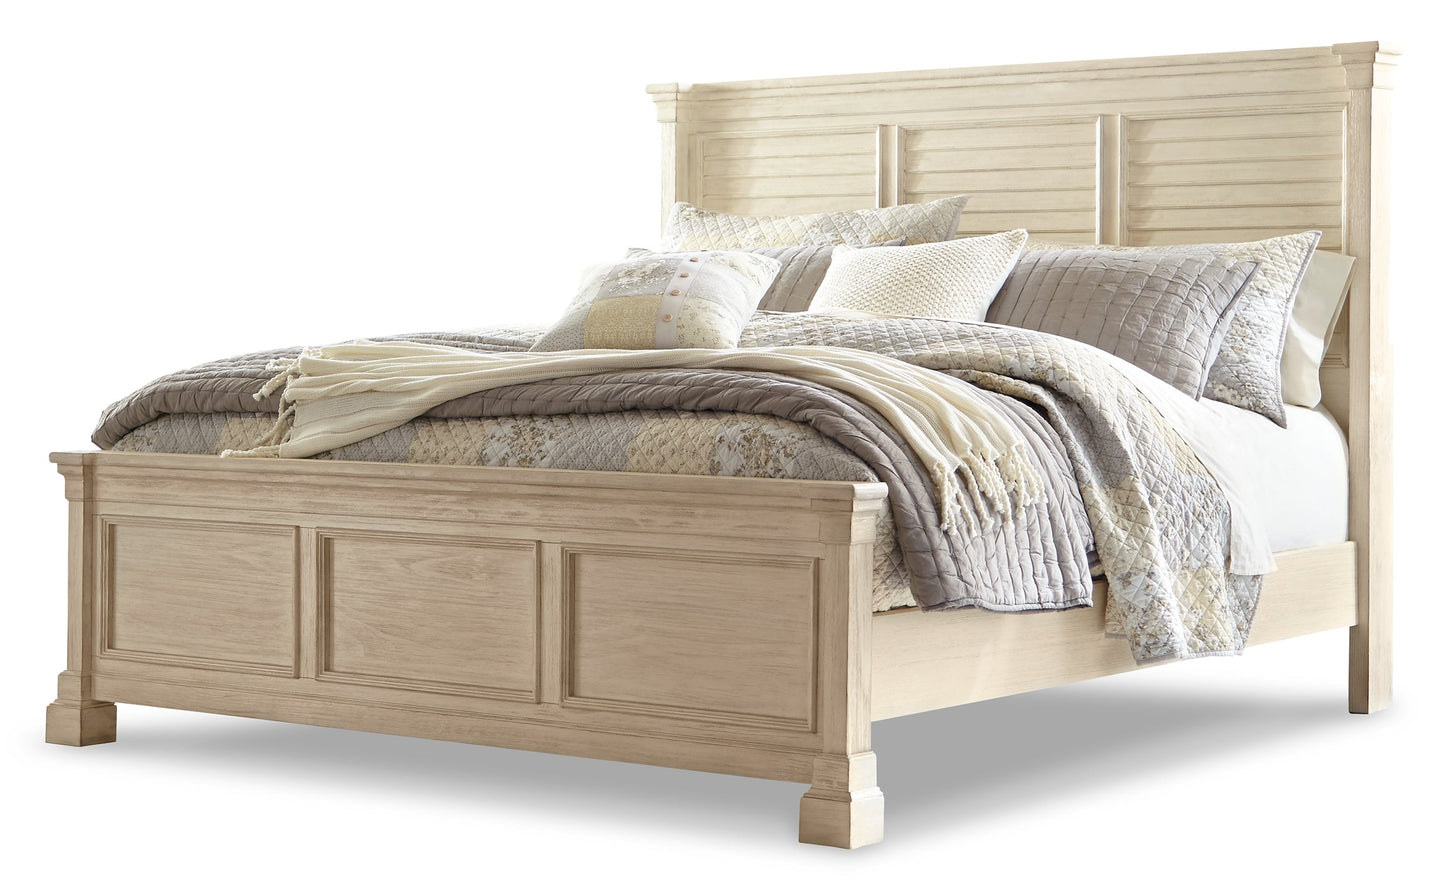 Bolanburg King Panel Bed with Dresser at Walker Mattress and Furniture Locations in Cedar Park and Belton TX.